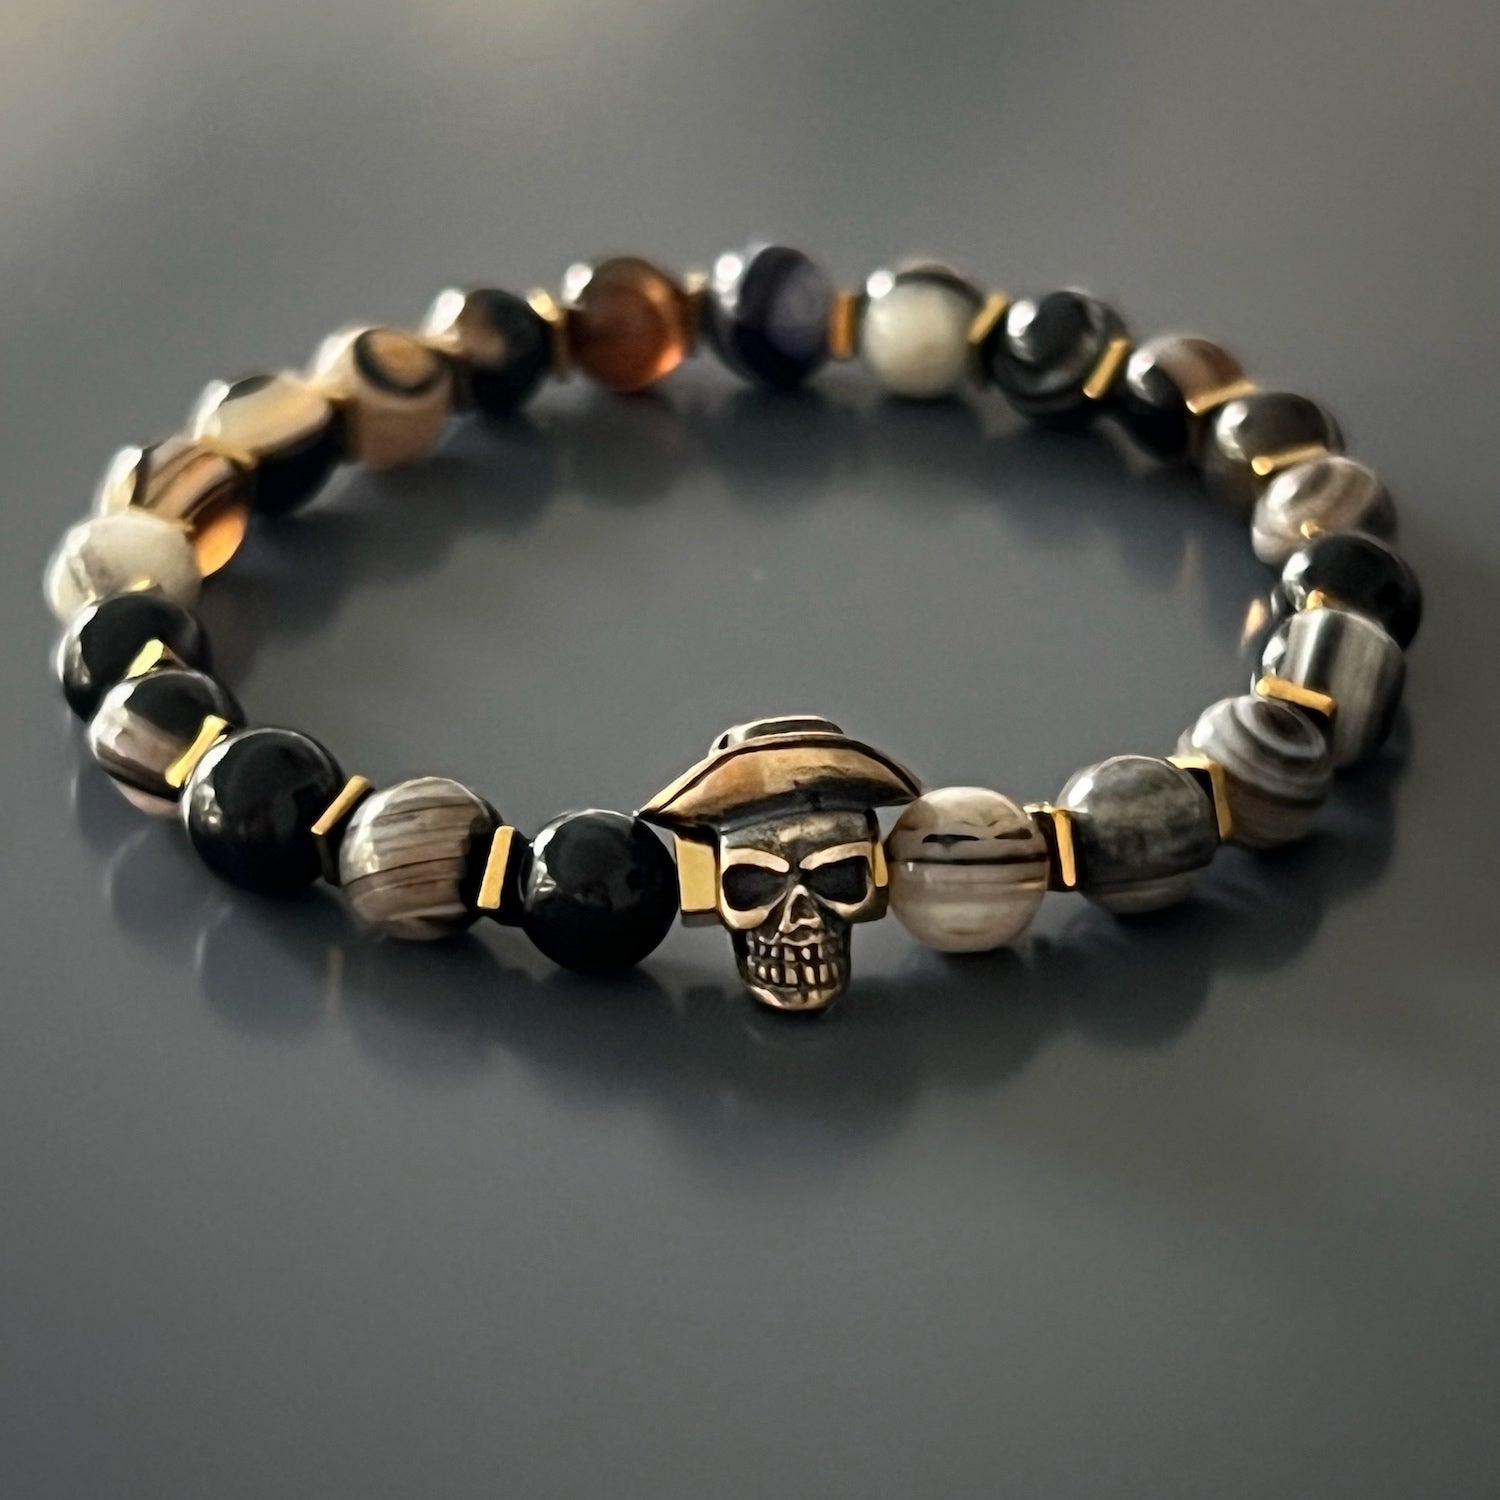 Elevate your style with the Cowboy Hat Skull Agate Bracelet. This handmade bracelet showcases Agate stone beads, gold hematite spacers, and a bronze cowboy hat skull charm. Embrace your individuality and add a touch of edginess to your accessories.